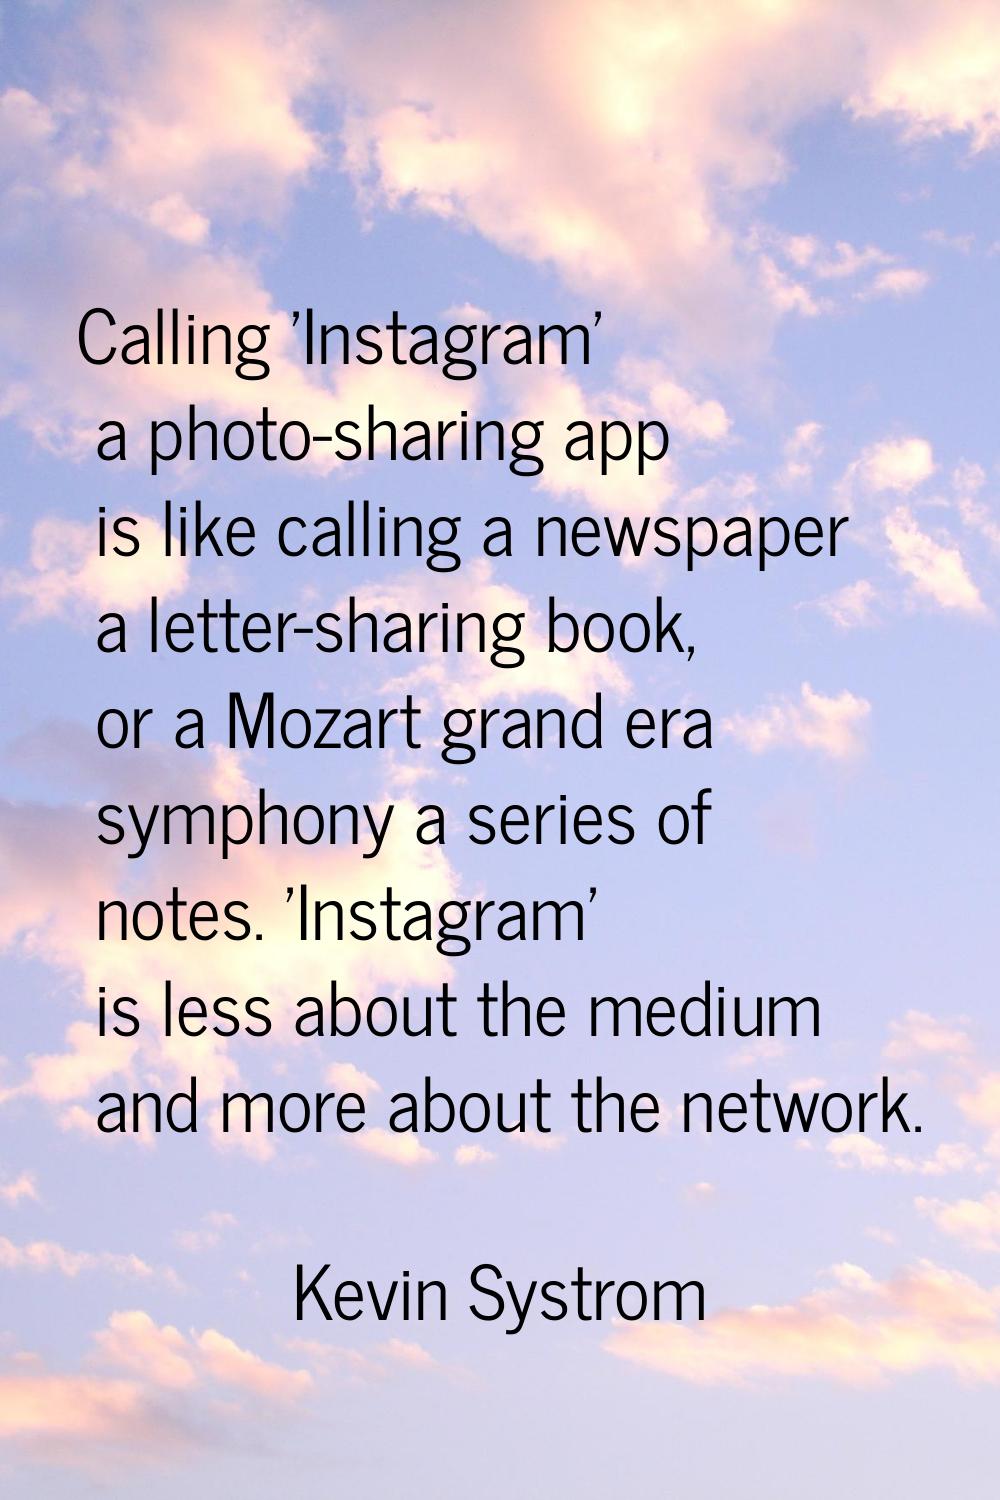 Calling 'Instagram' a photo-sharing app is like calling a newspaper a letter-sharing book, or a Moz